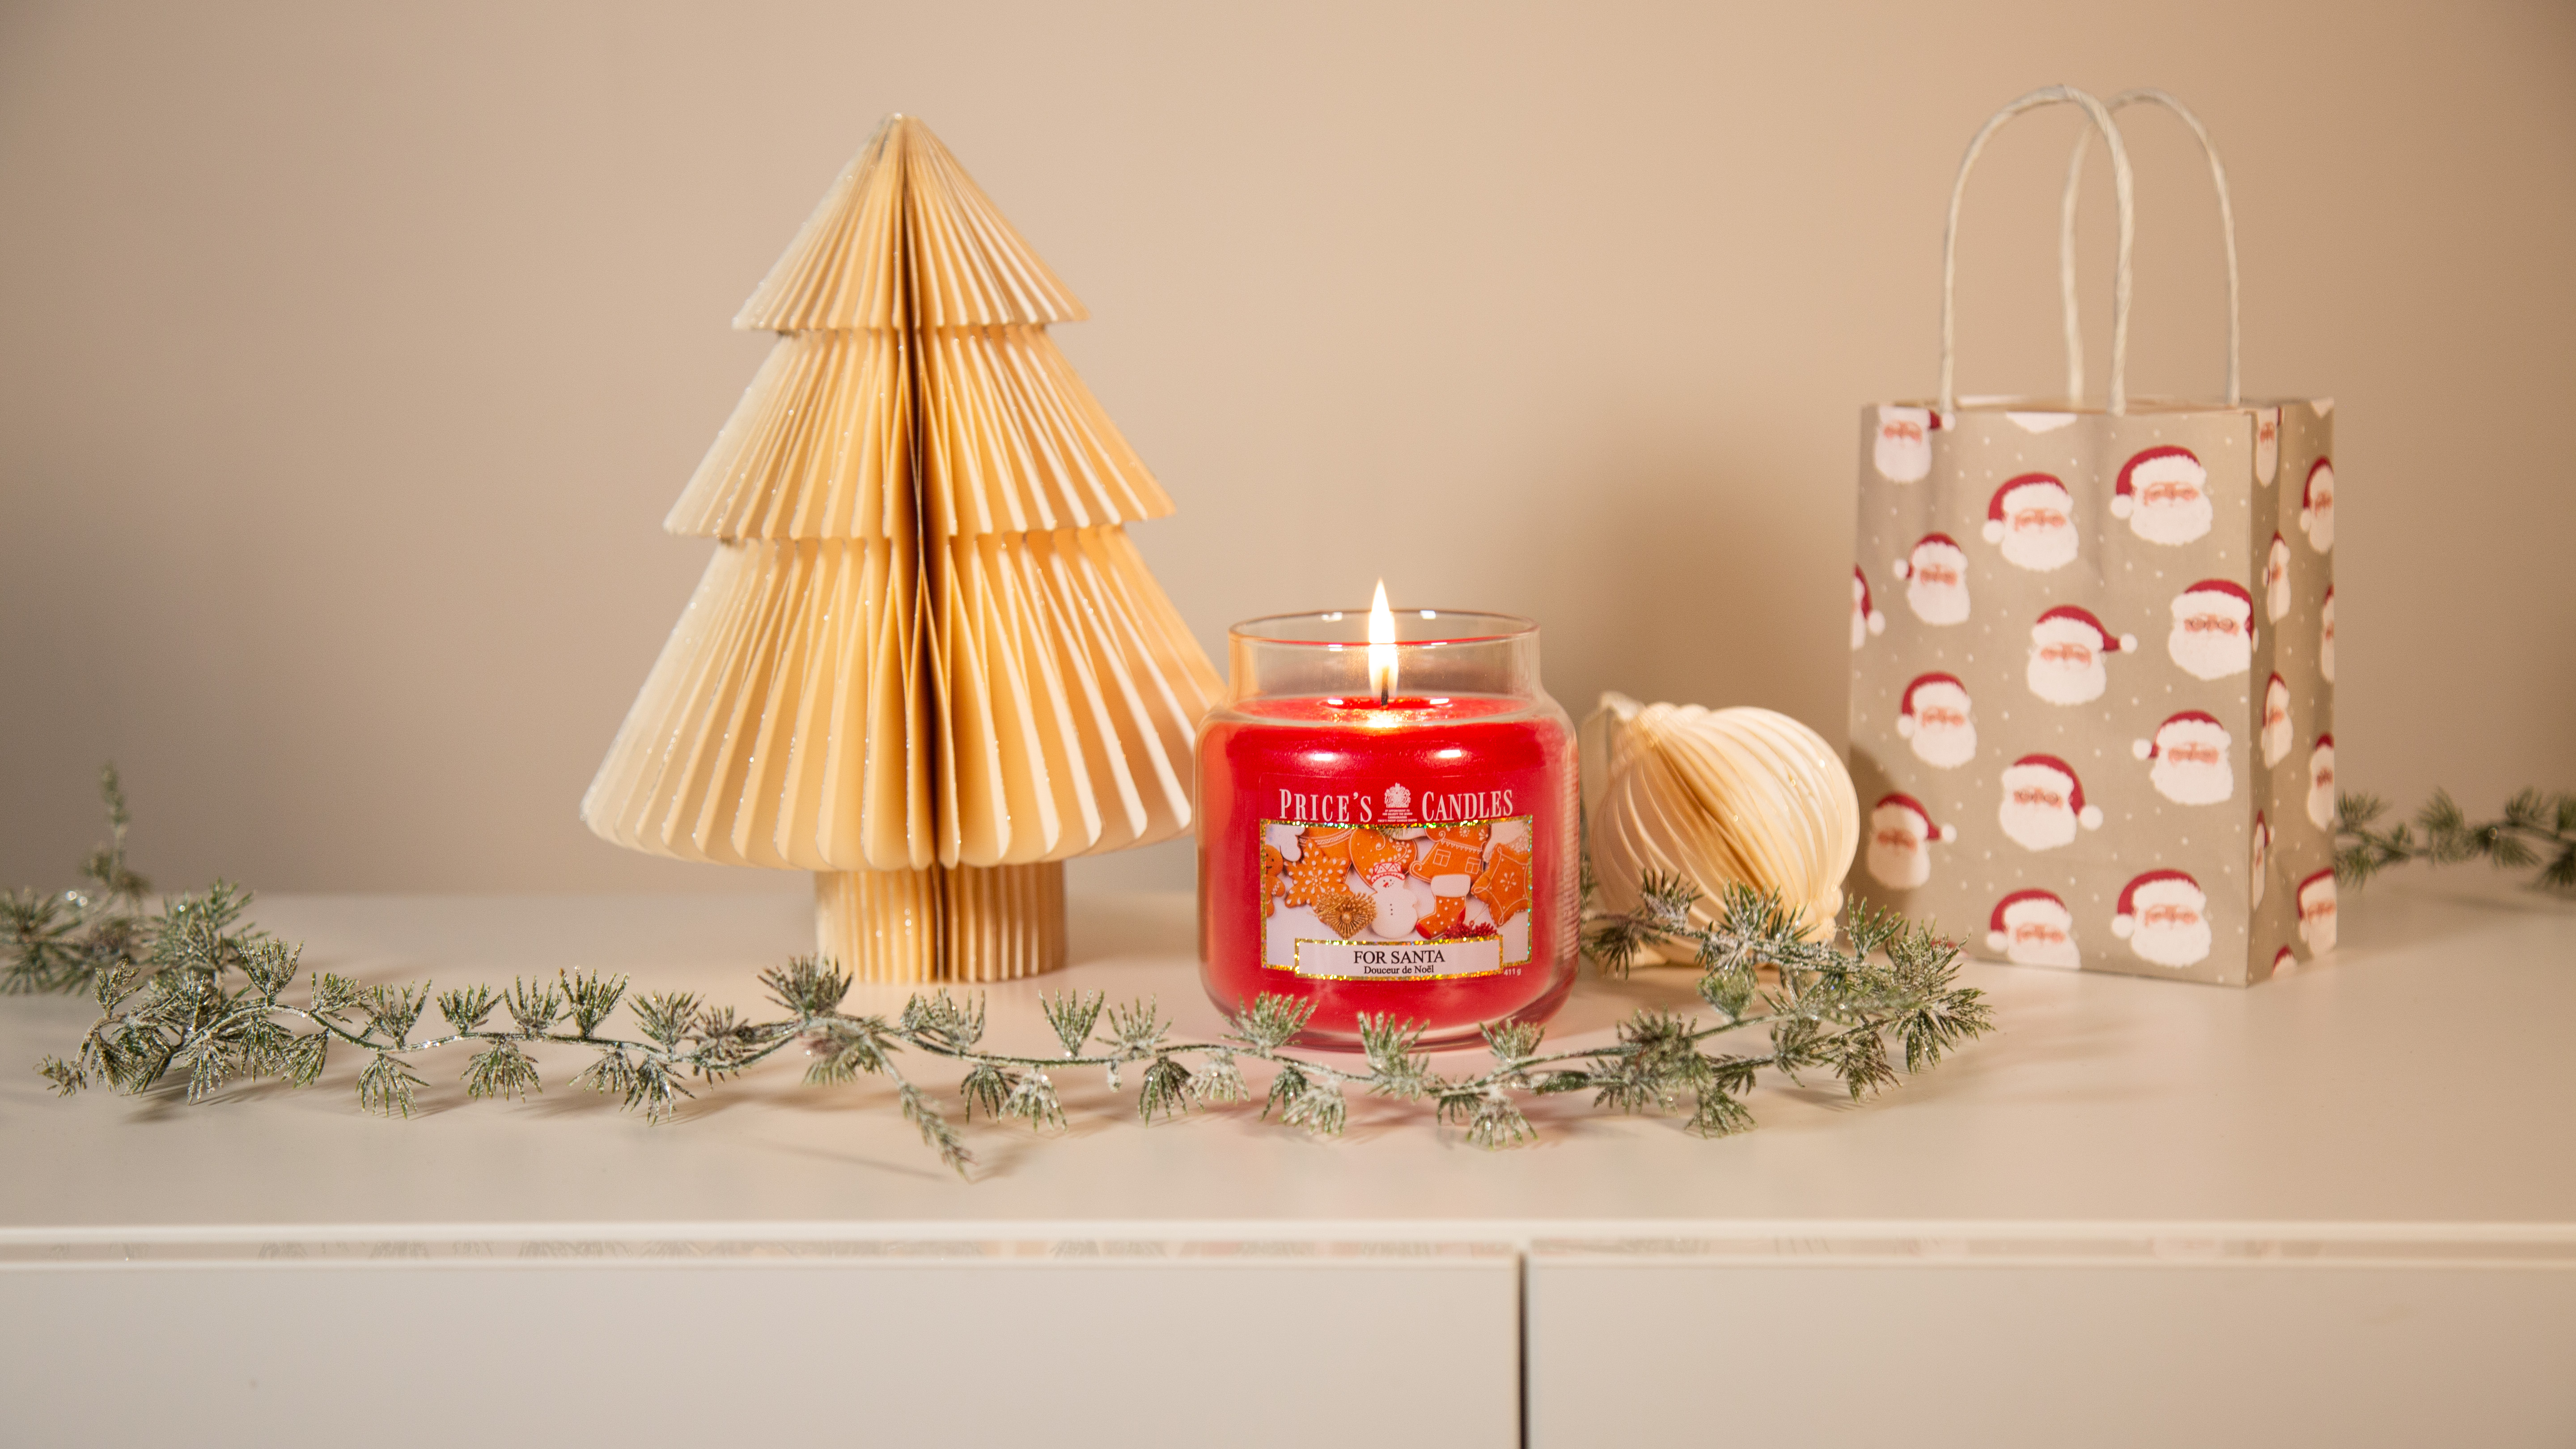 Prices Candle "For Santa" 411g 